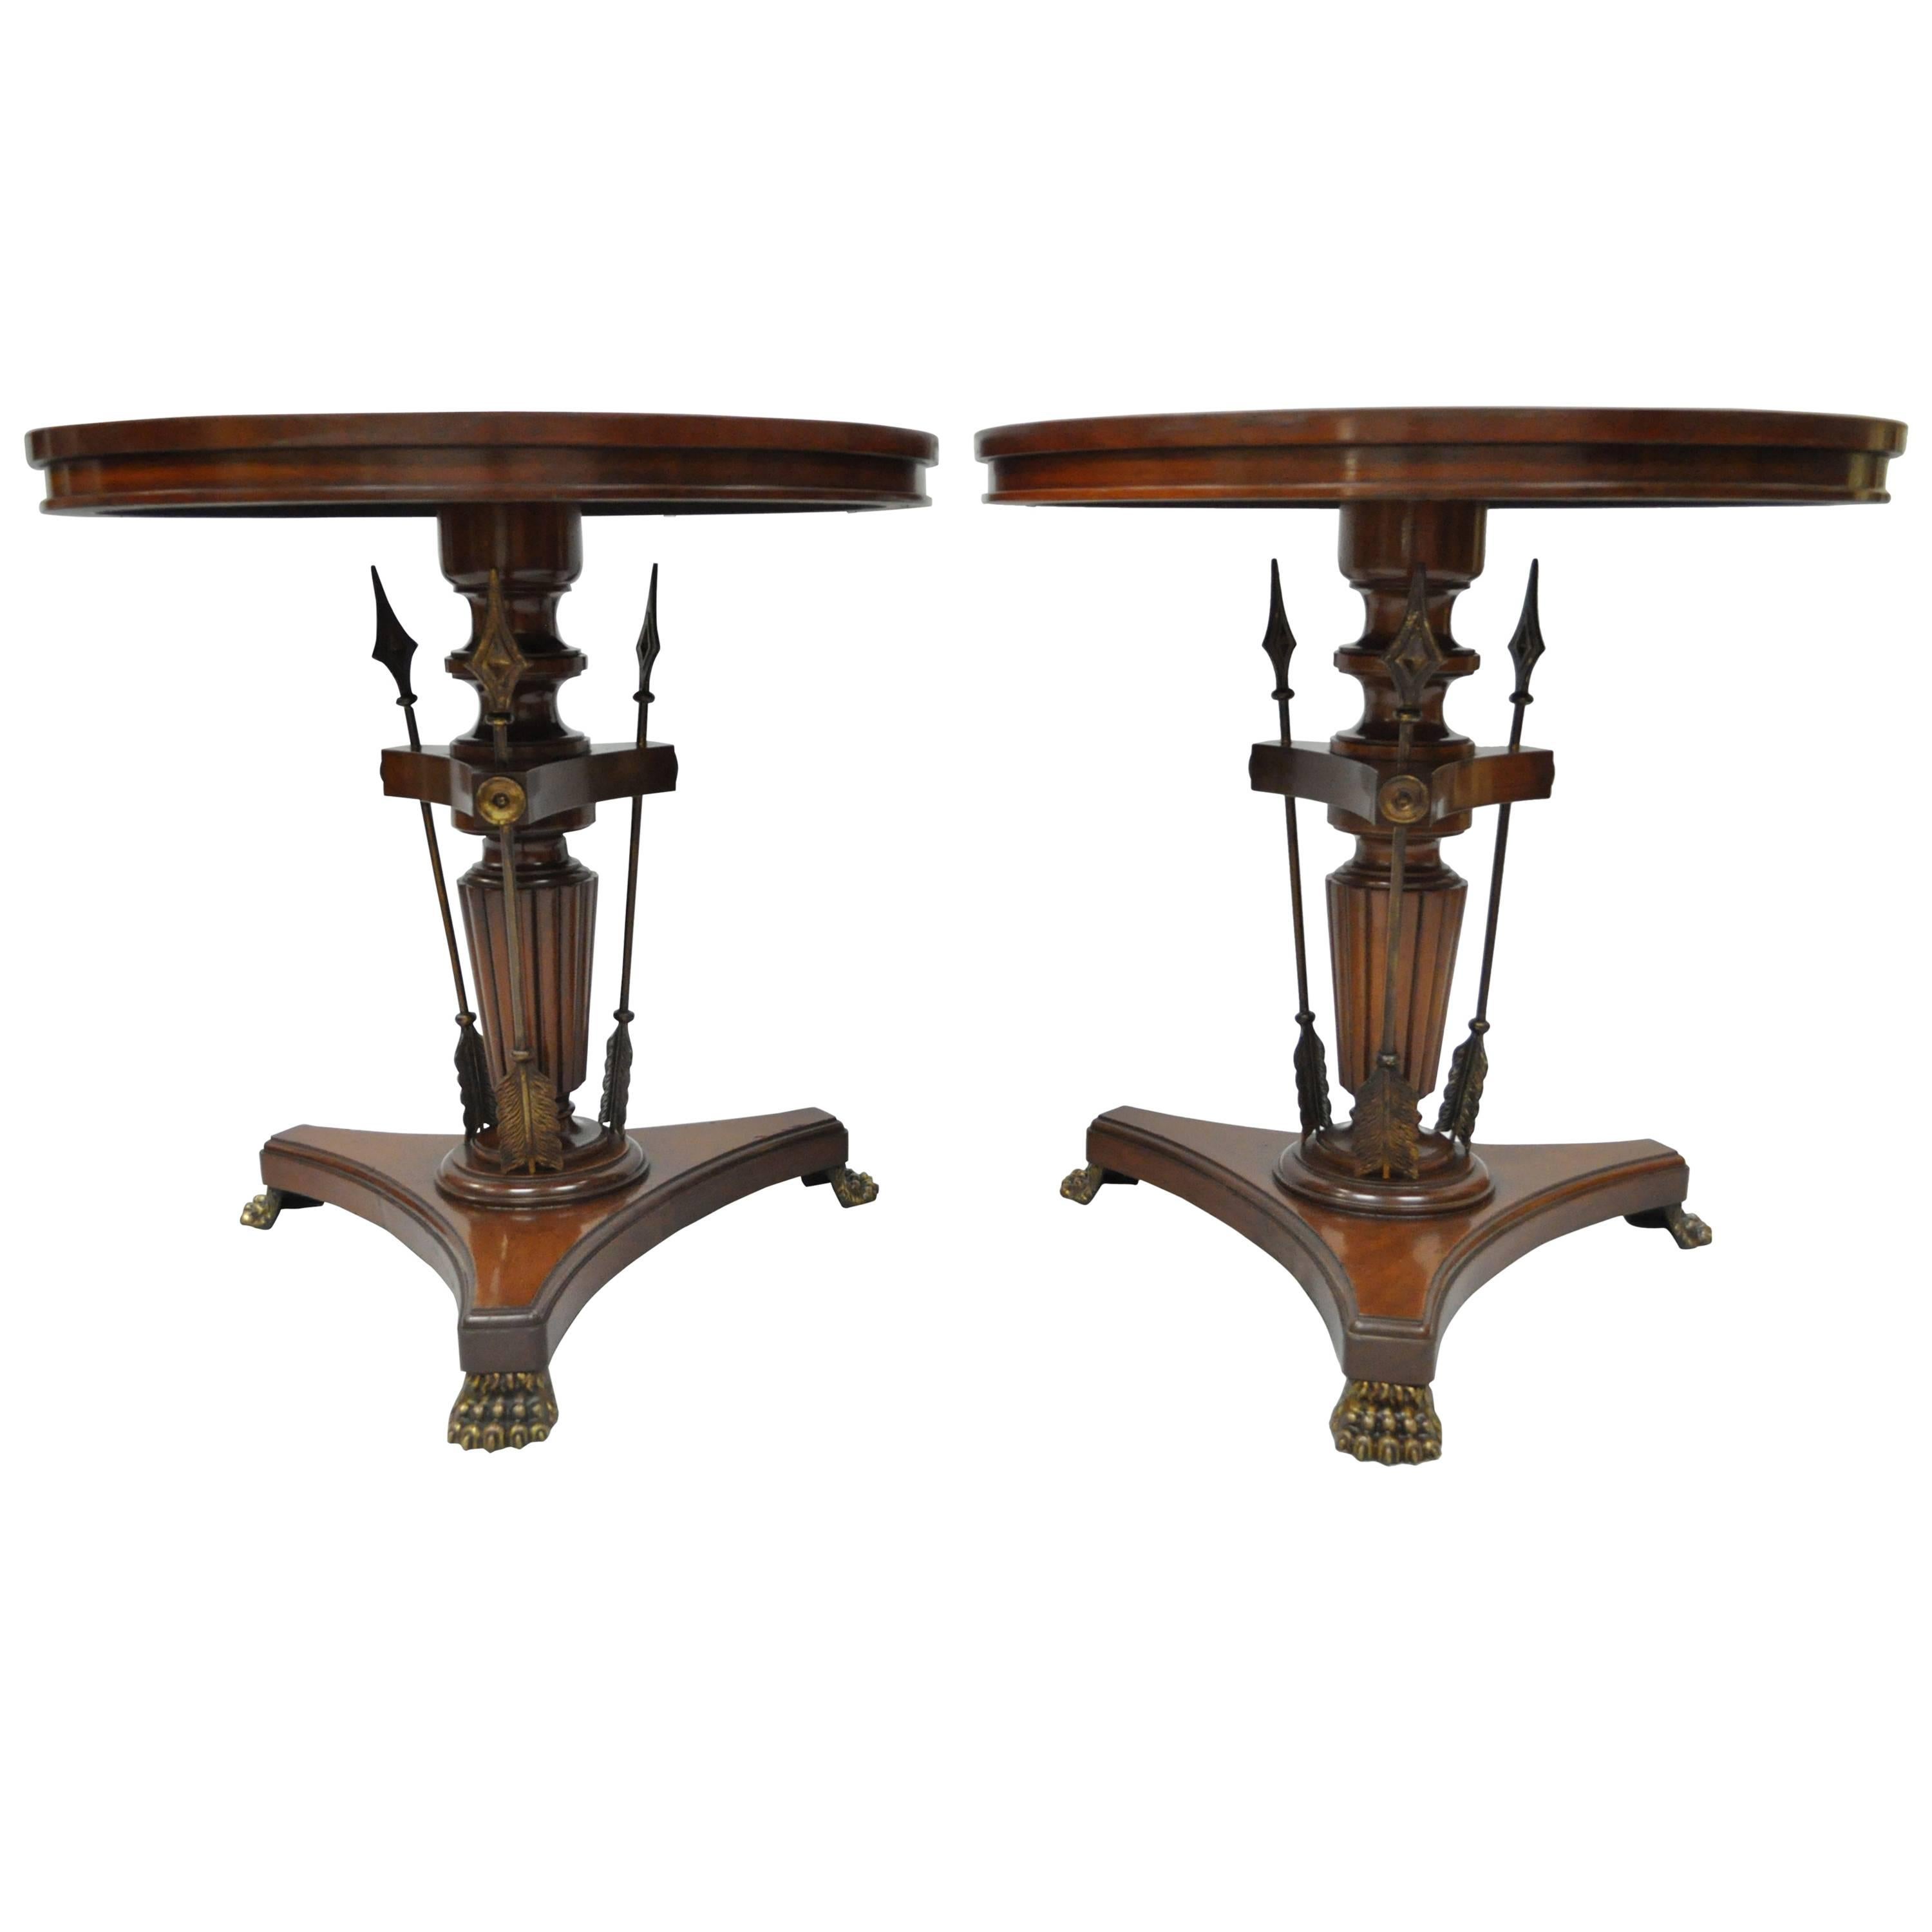 Pair of Crotch Mahogany & Brass Neoclassical Style Arrow Base Round Side Tables